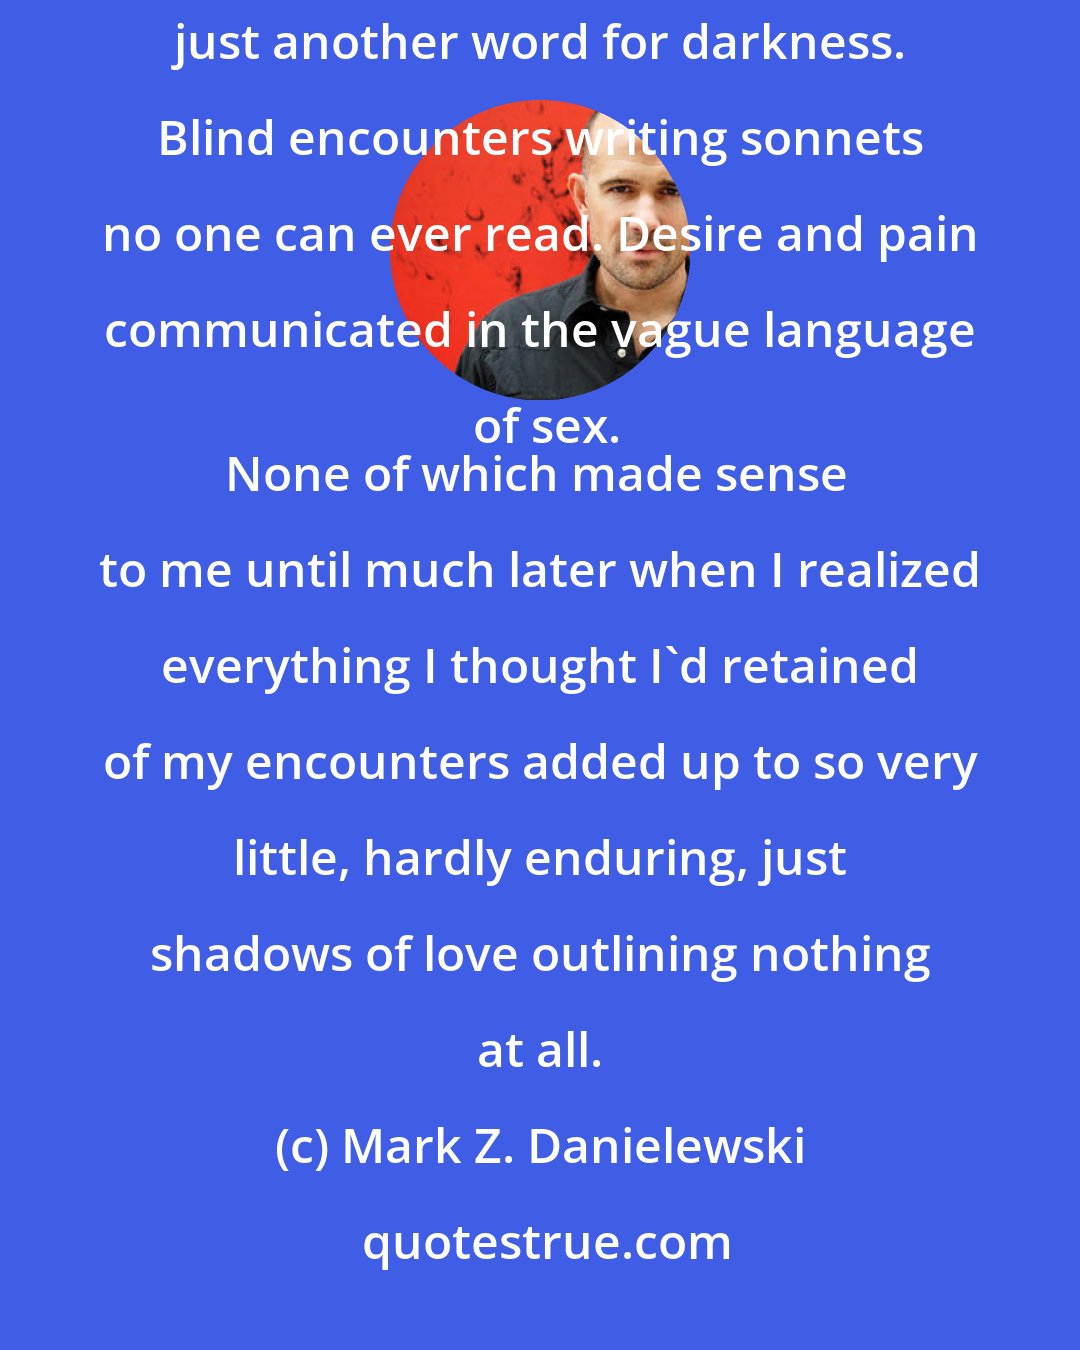 Mark Z. Danielewski: People frequently comment on the emptiness in one night stands, but emptiness here has always been just another word for darkness. Blind encounters writing sonnets no one can ever read. Desire and pain communicated in the vague language of sex.
None of which made sense to me until much later when I realized everything I thought I'd retained of my encounters added up to so very little, hardly enduring, just shadows of love outlining nothing at all.